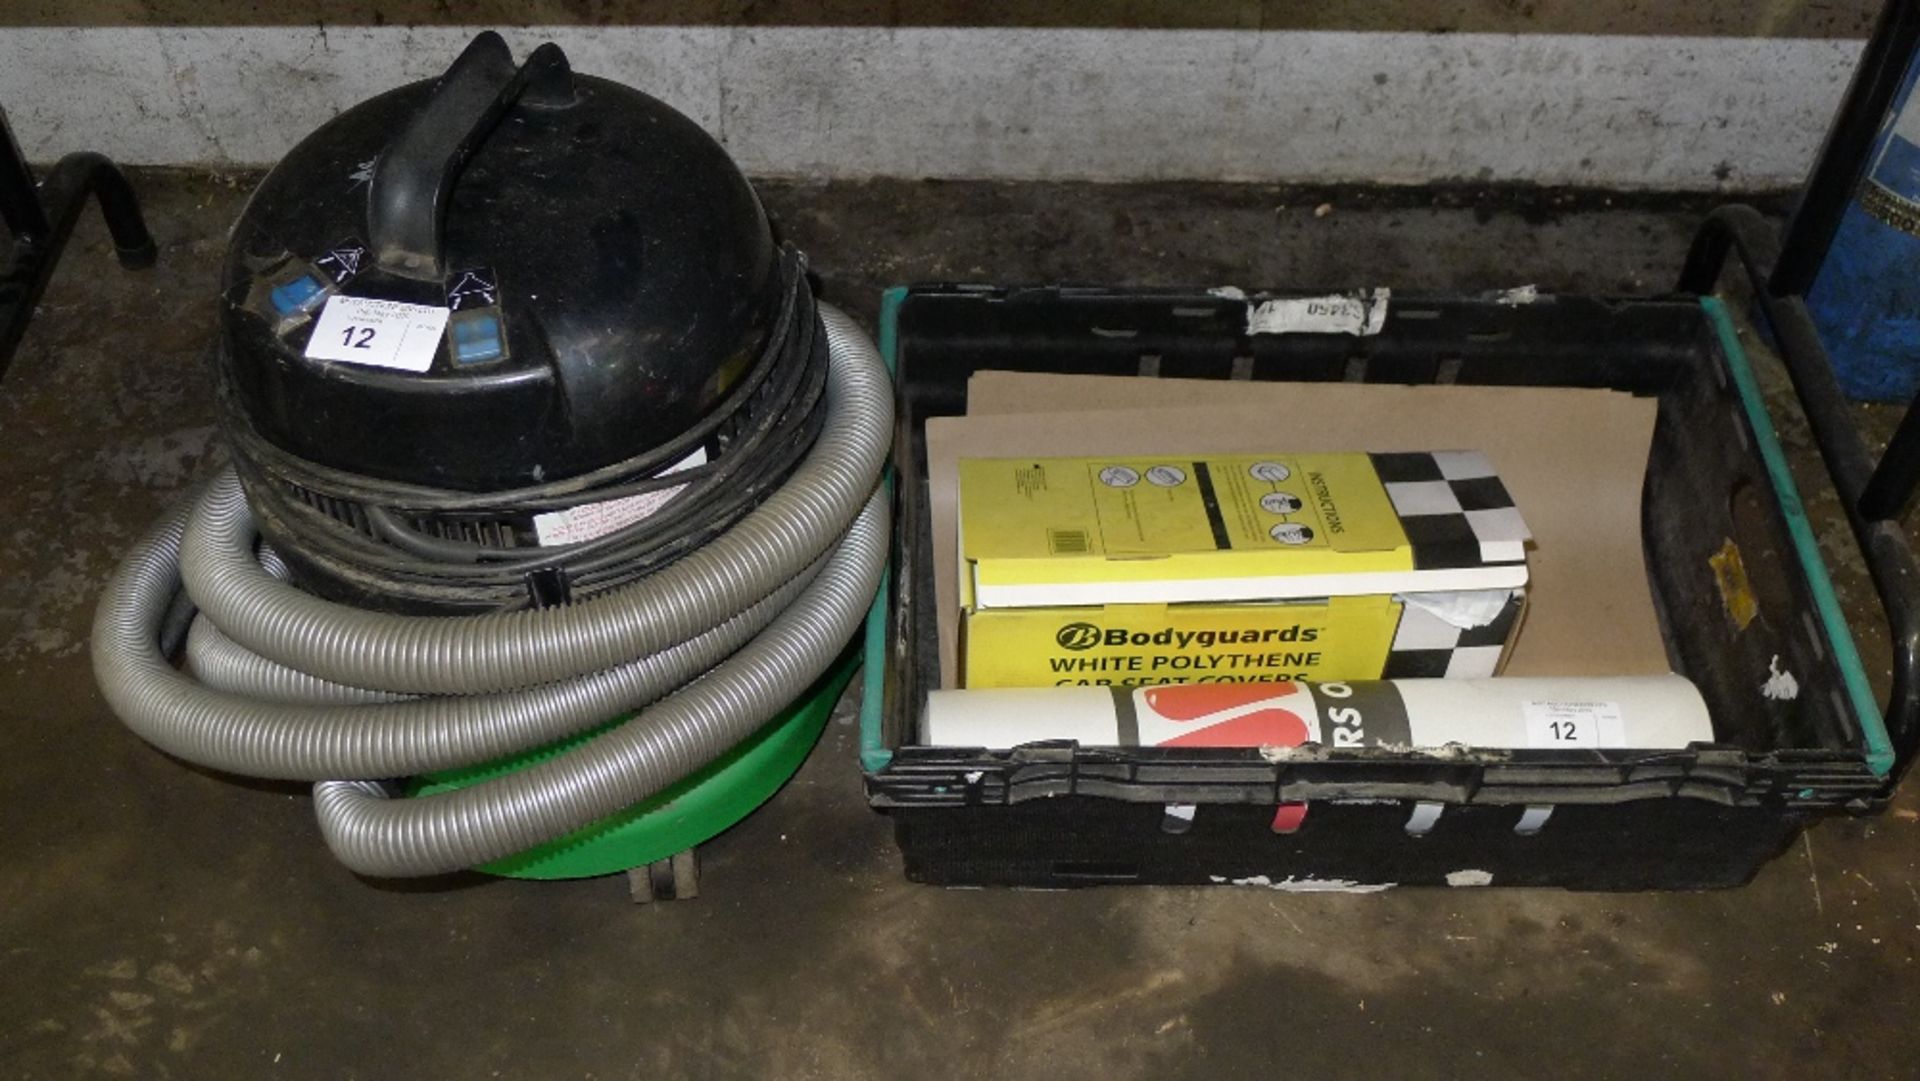 1 vacuum cleaner, 1 roll of polythene car seat covers and 1 roll of floor cover (plastic crate is